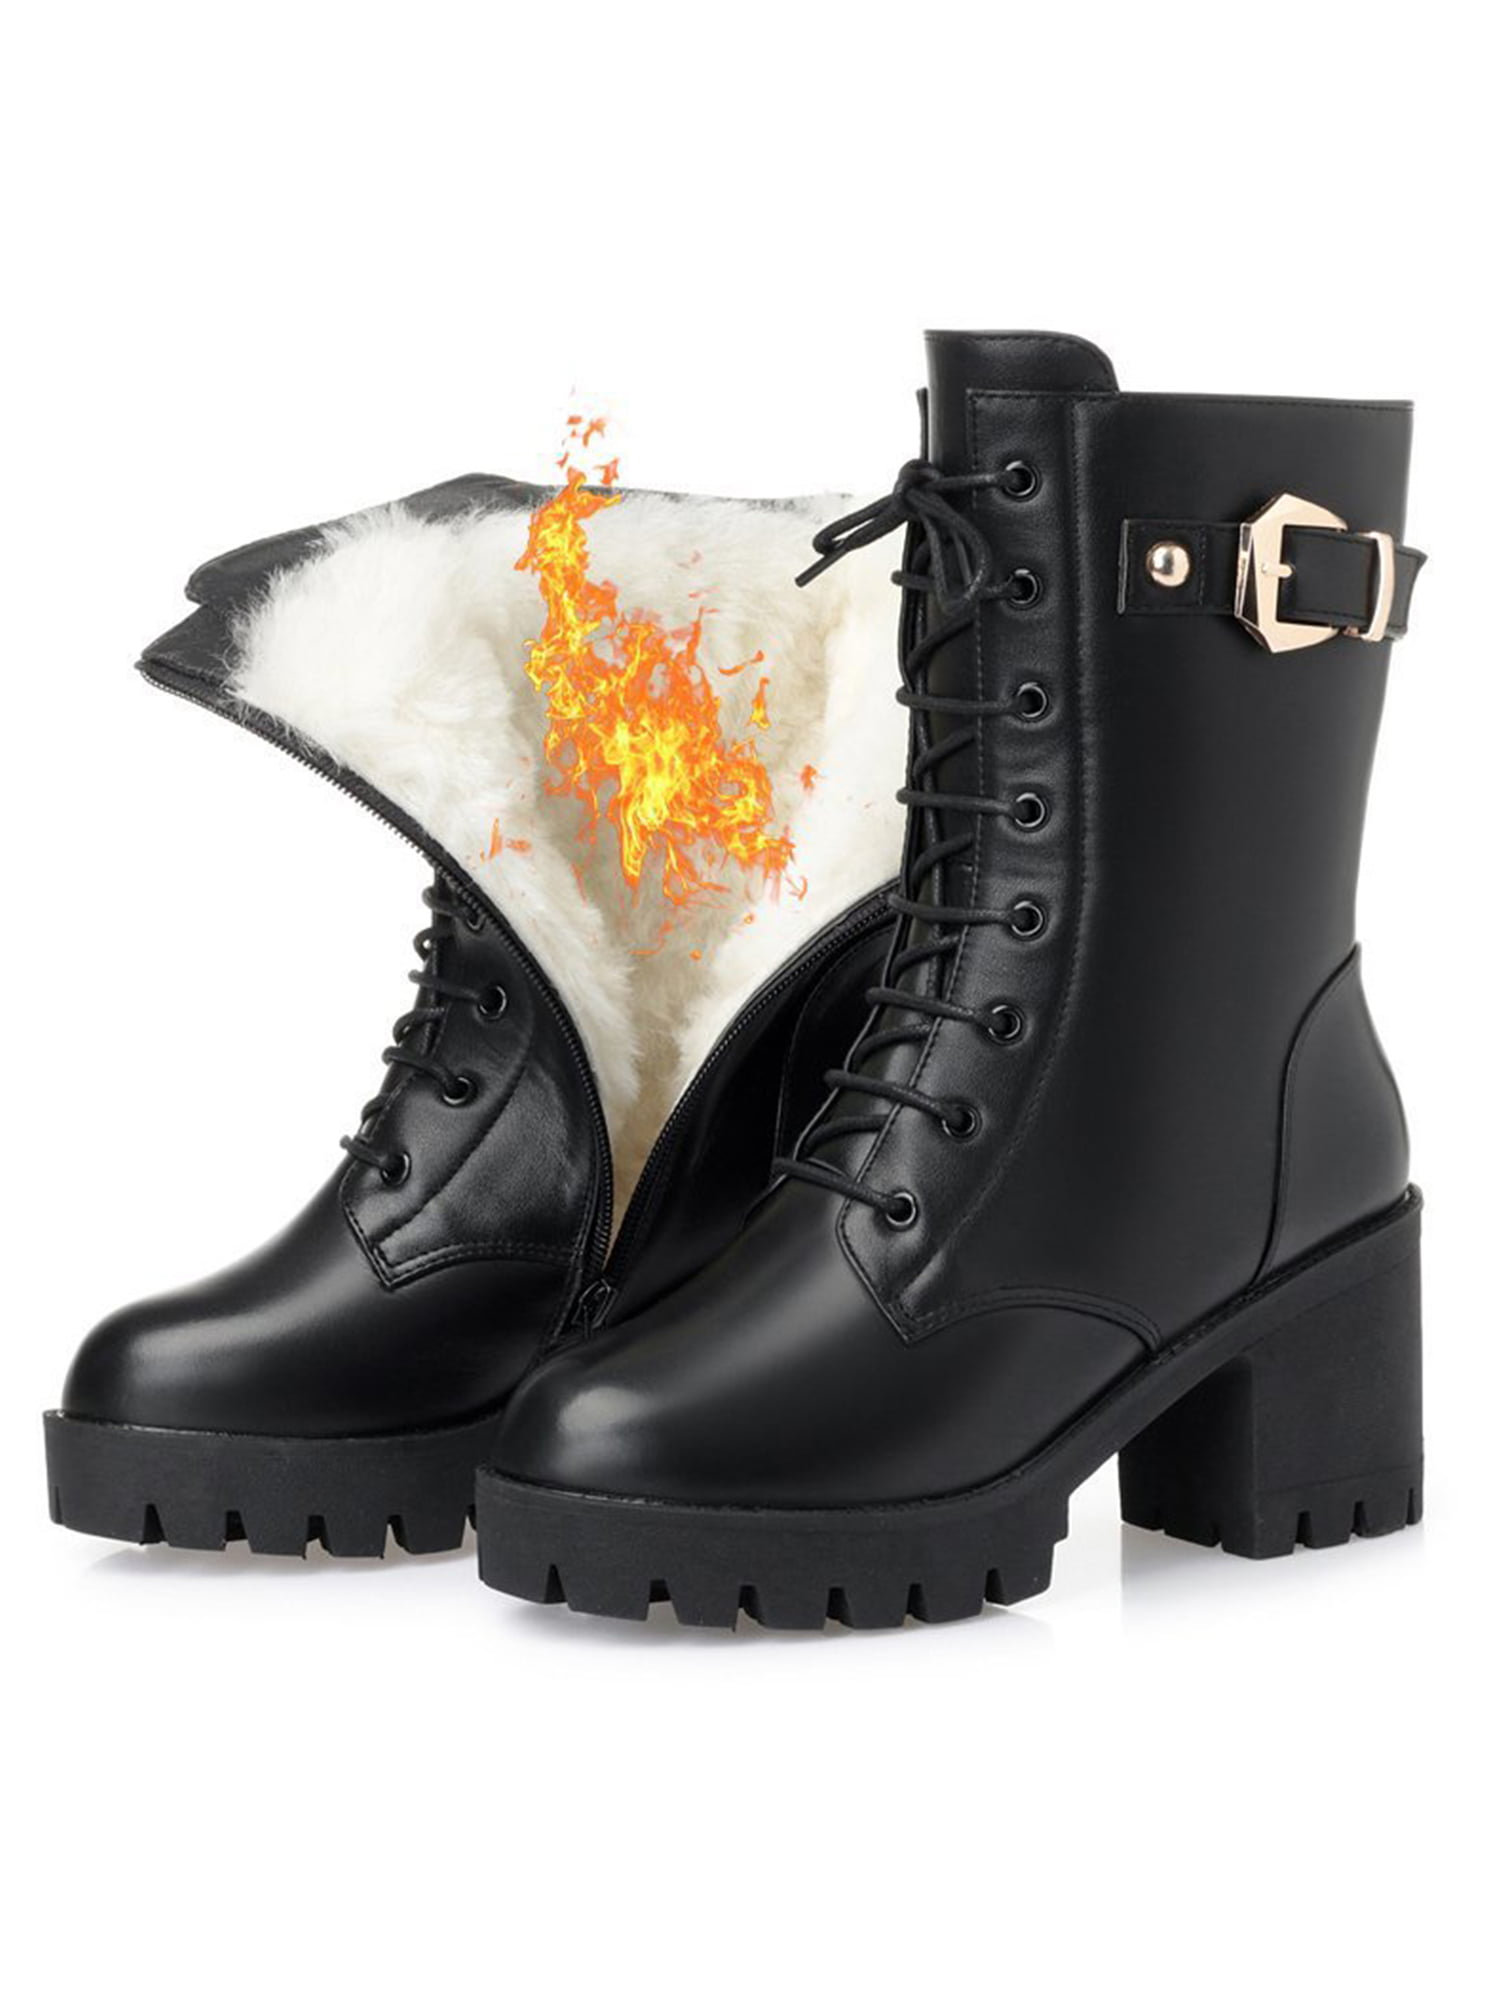 12 Ways to Style Heeled Combat Boots - wikiHow Life